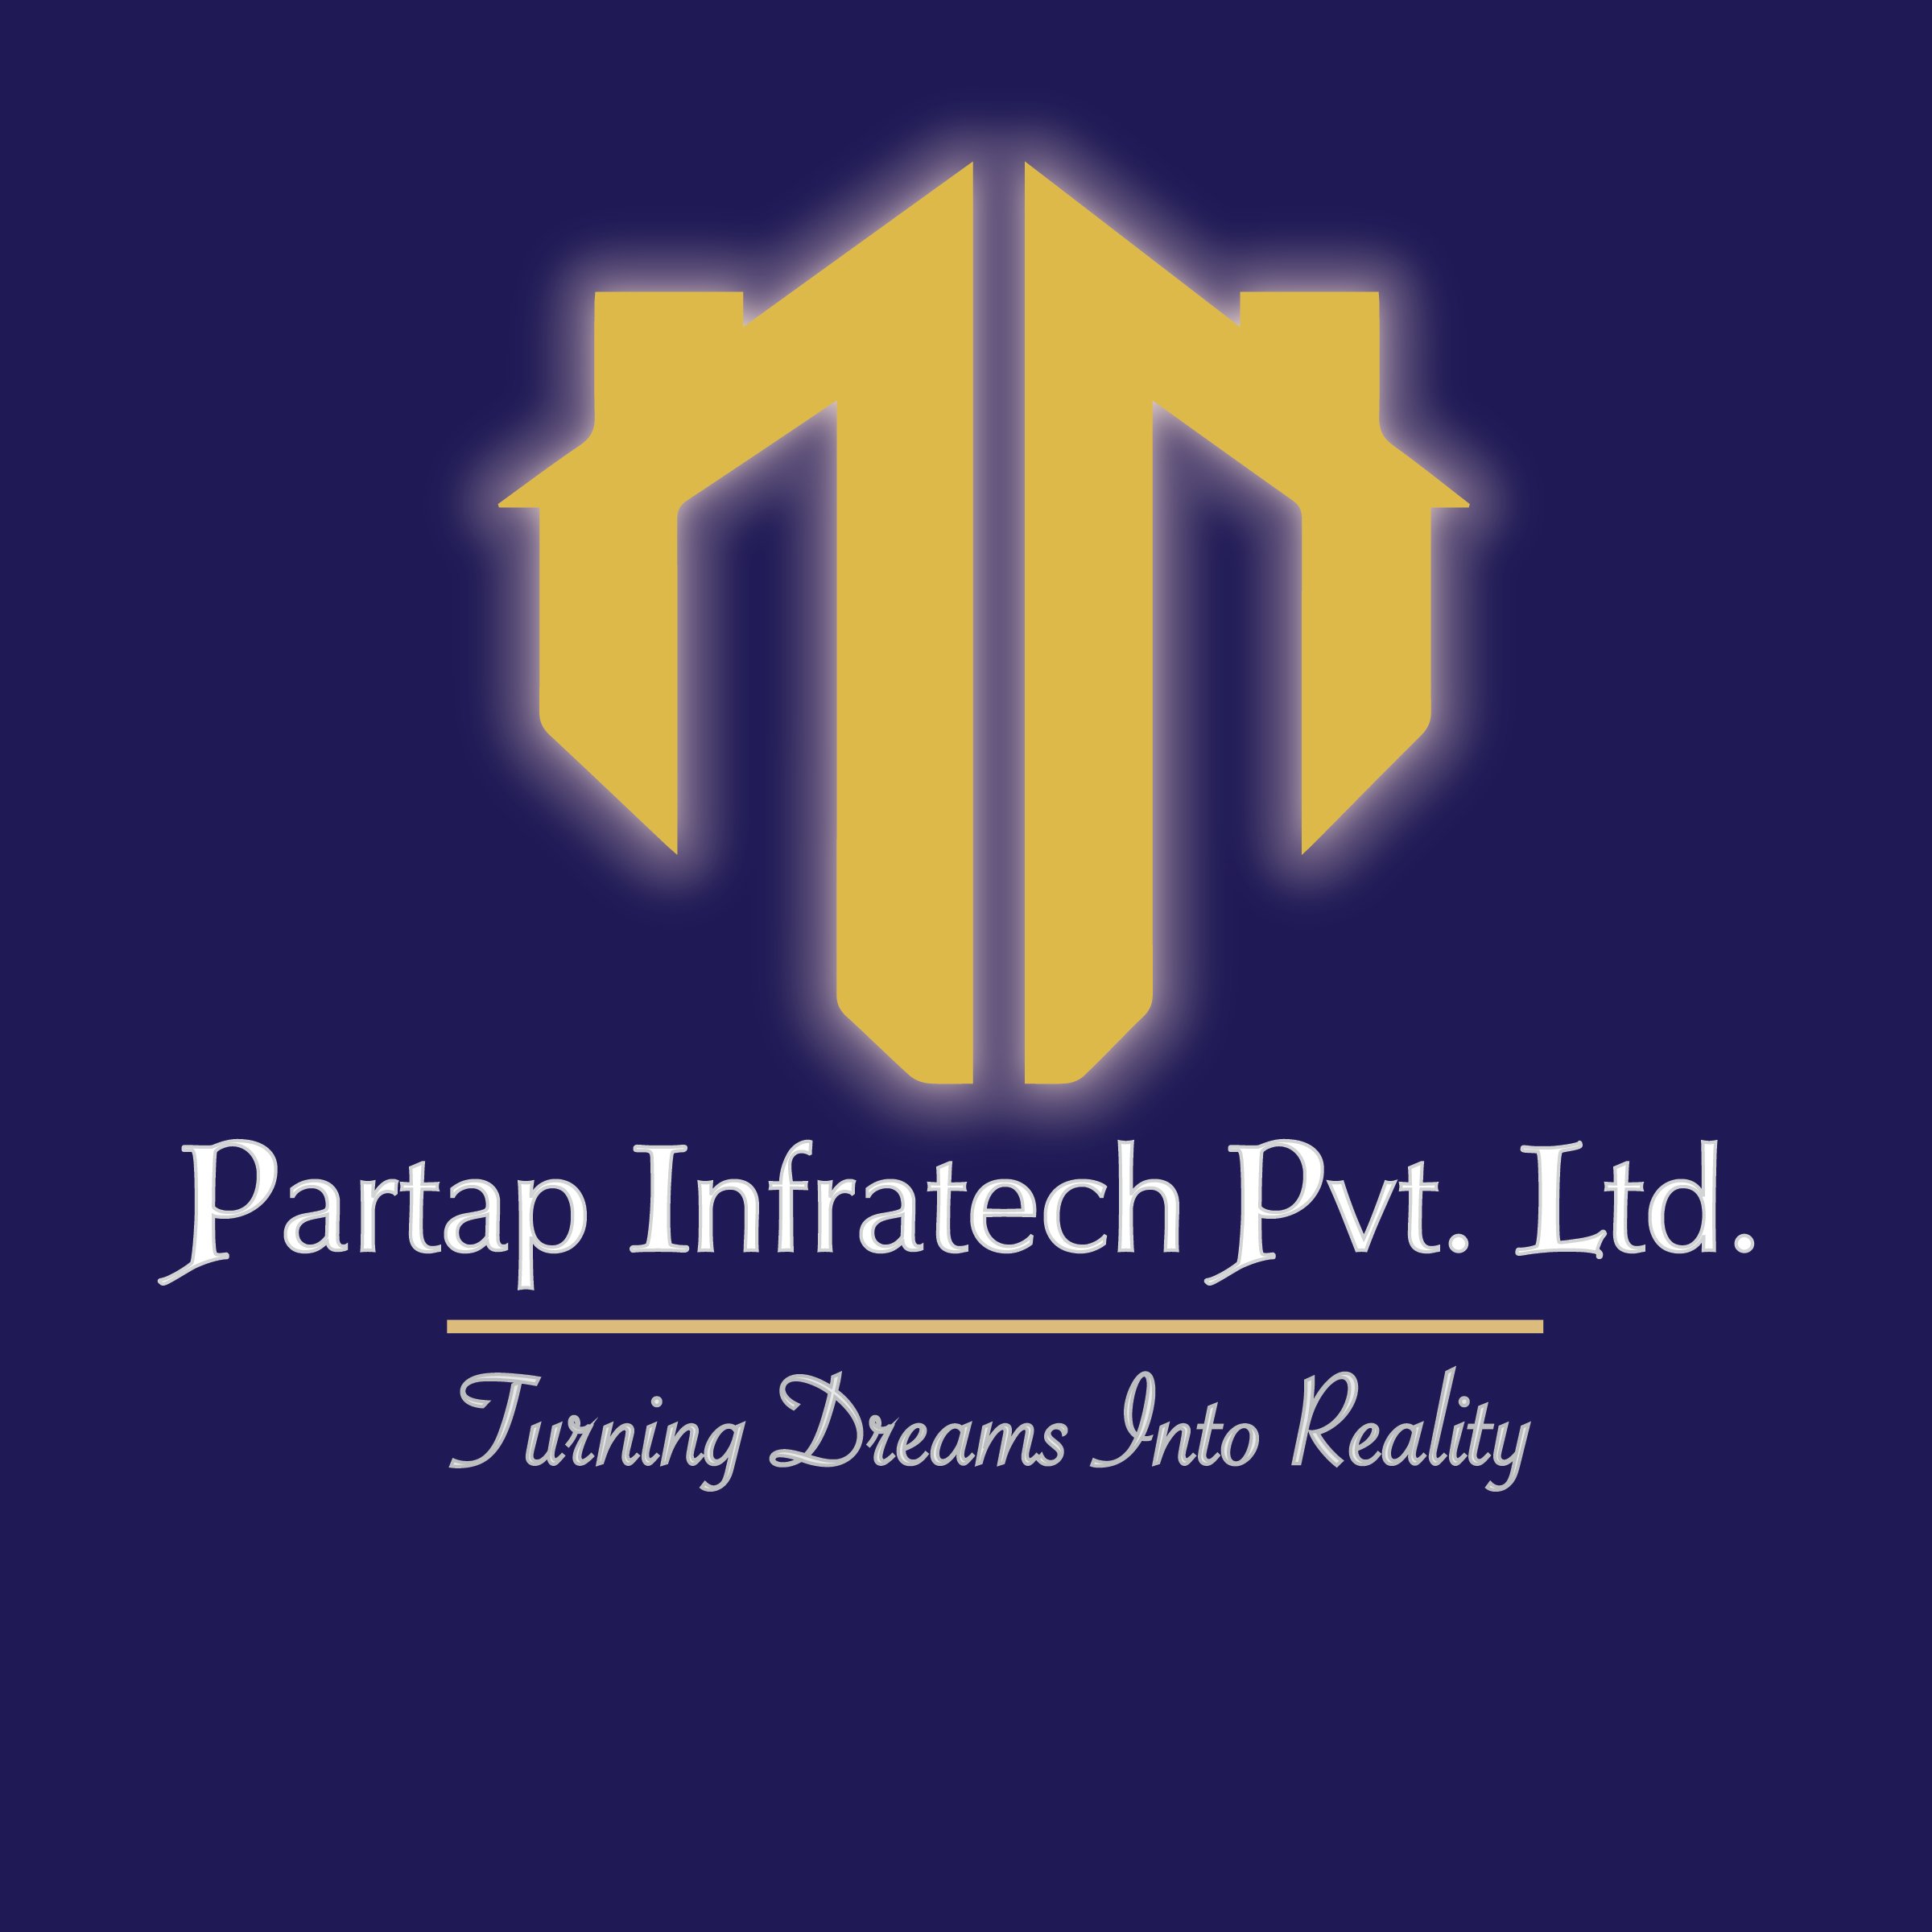 NO. 1 real estate company in Kharar.
Partap Infartech https://t.co/r7uoE3nNrh
We deal in 
Commercial/ Residential/ Plots /Flats